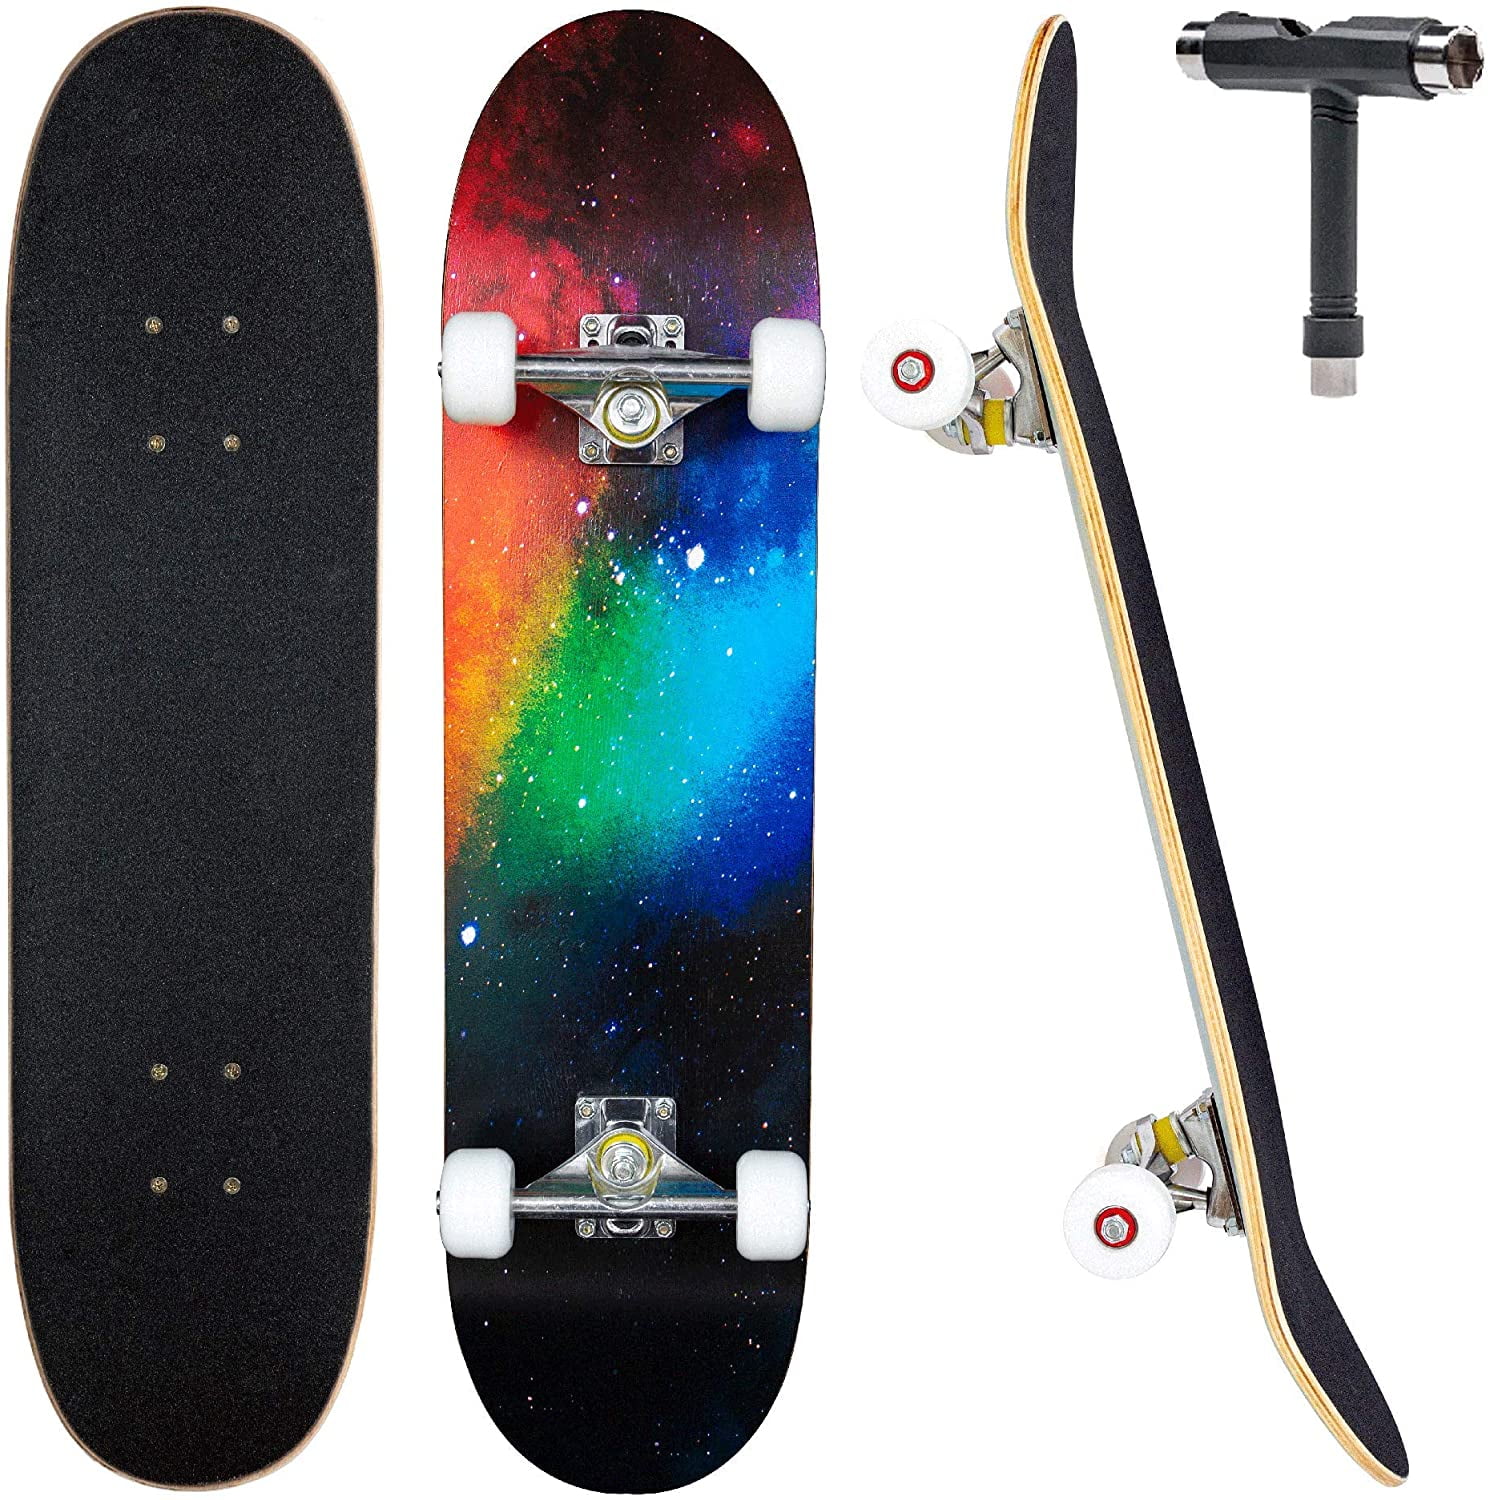 31 Inch Professional  Complete Skateboard 7 Ply Maple for Adult and Kids a03 